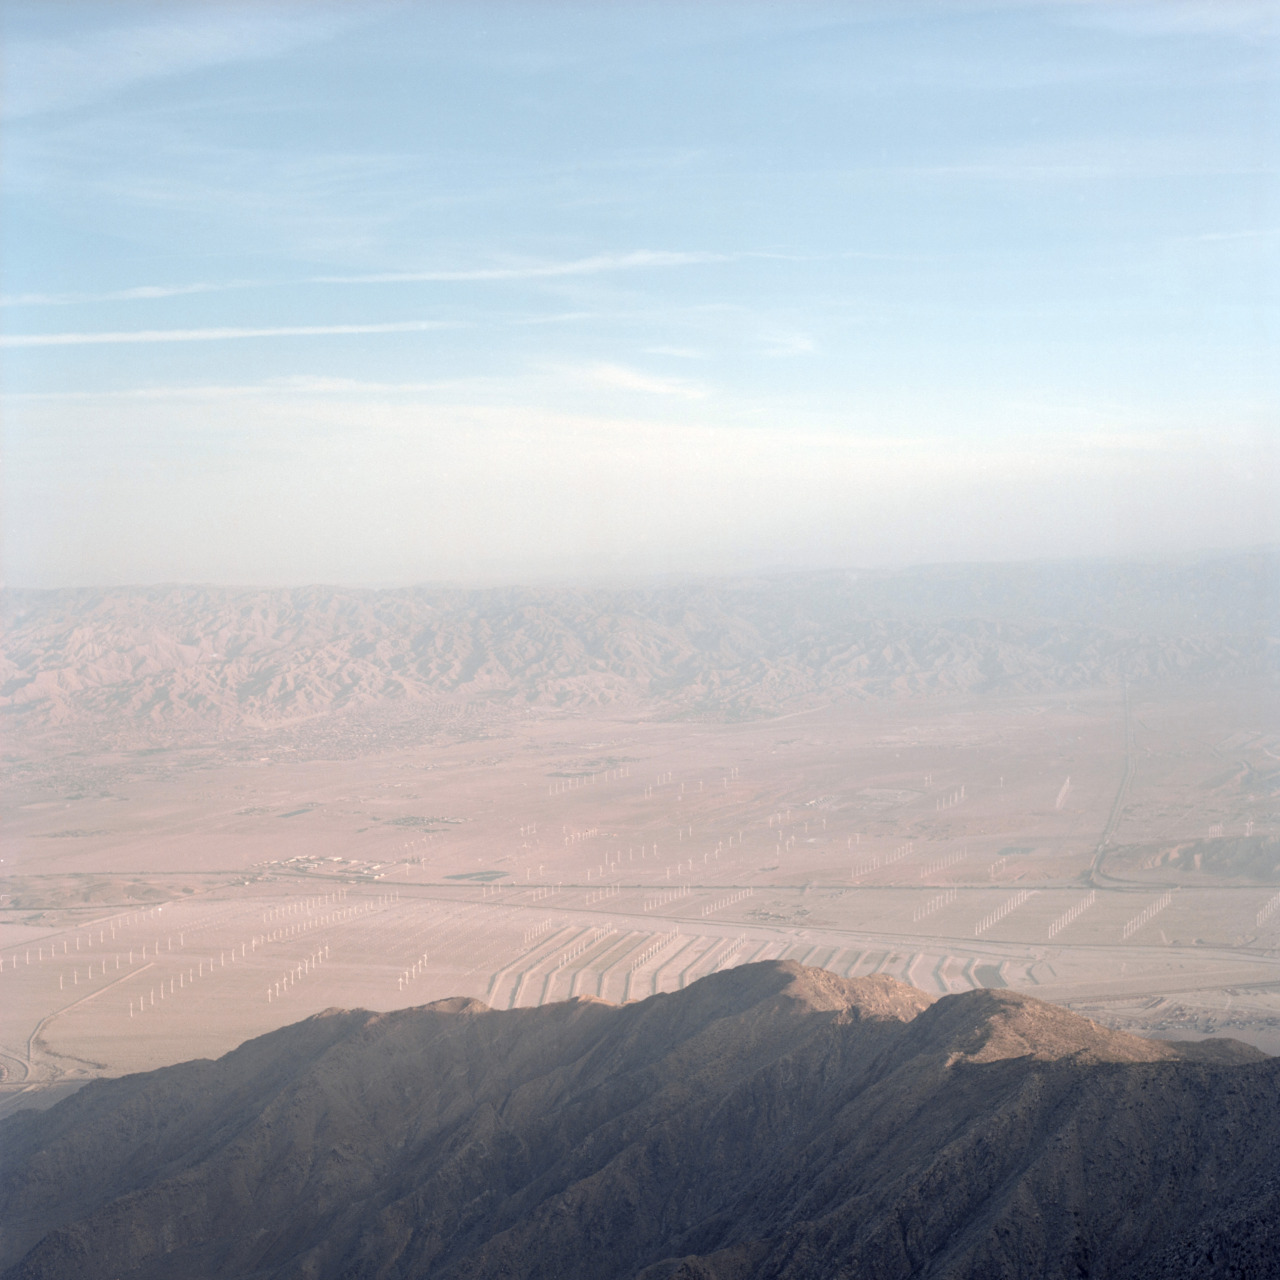 The valley and its monuments.
Coachella Valley, California